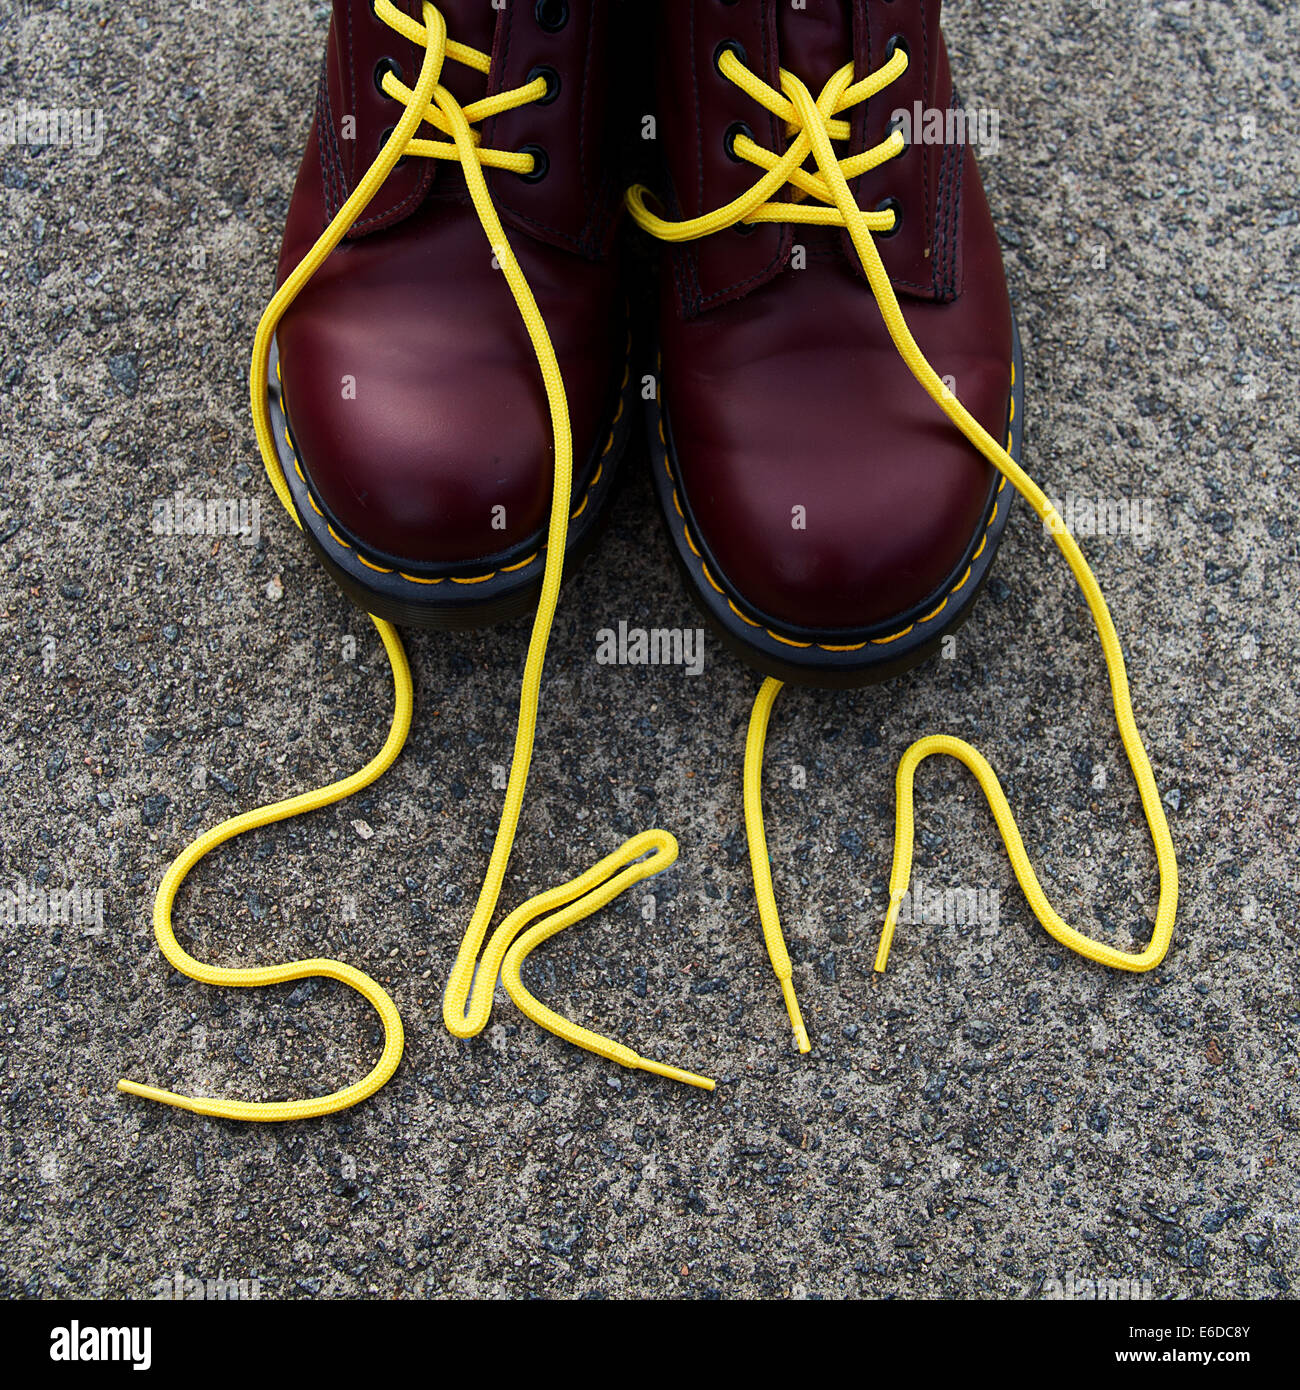 Red Dr Martens boots with yellow laces 